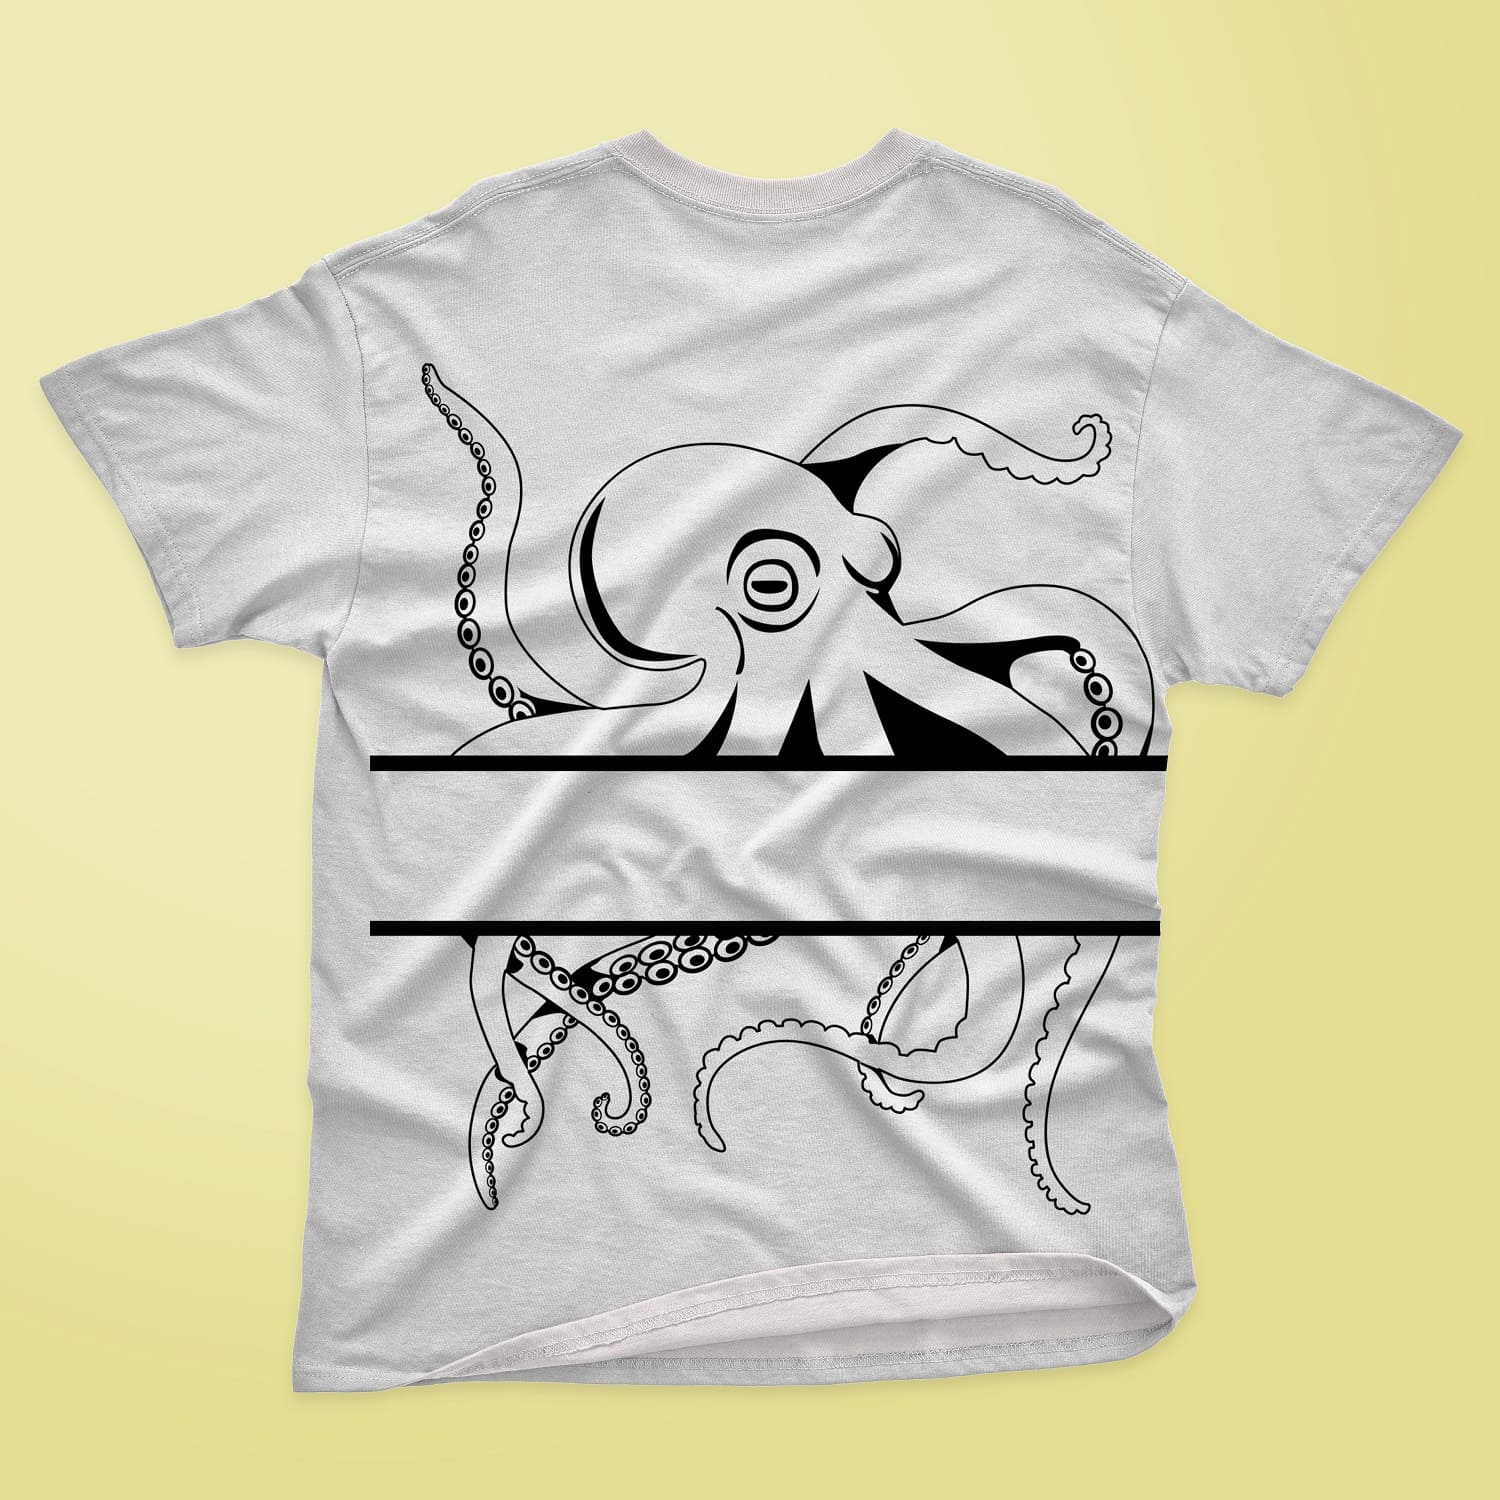 White T-shirt with black and white Monogram Octopus.